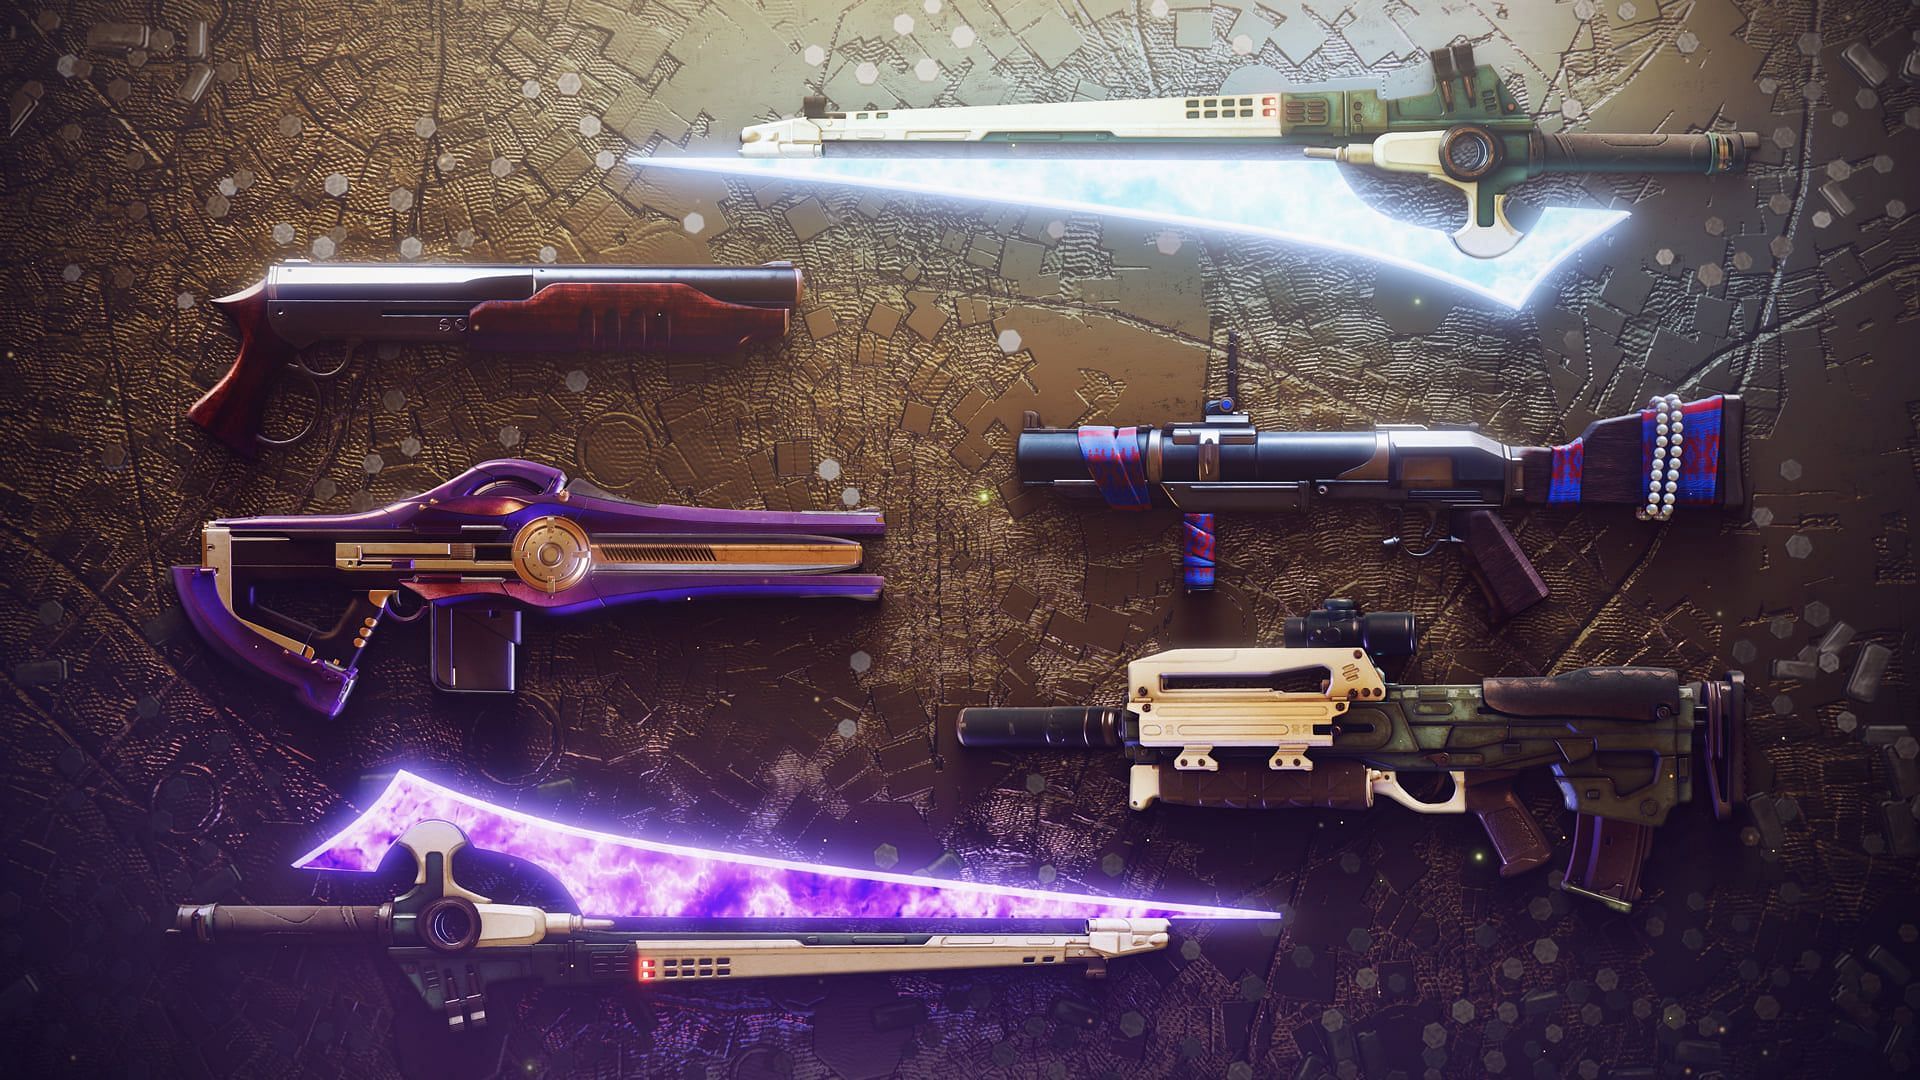 Halo and other collaboration weapons in Destiny 2 (Image via Bungie)